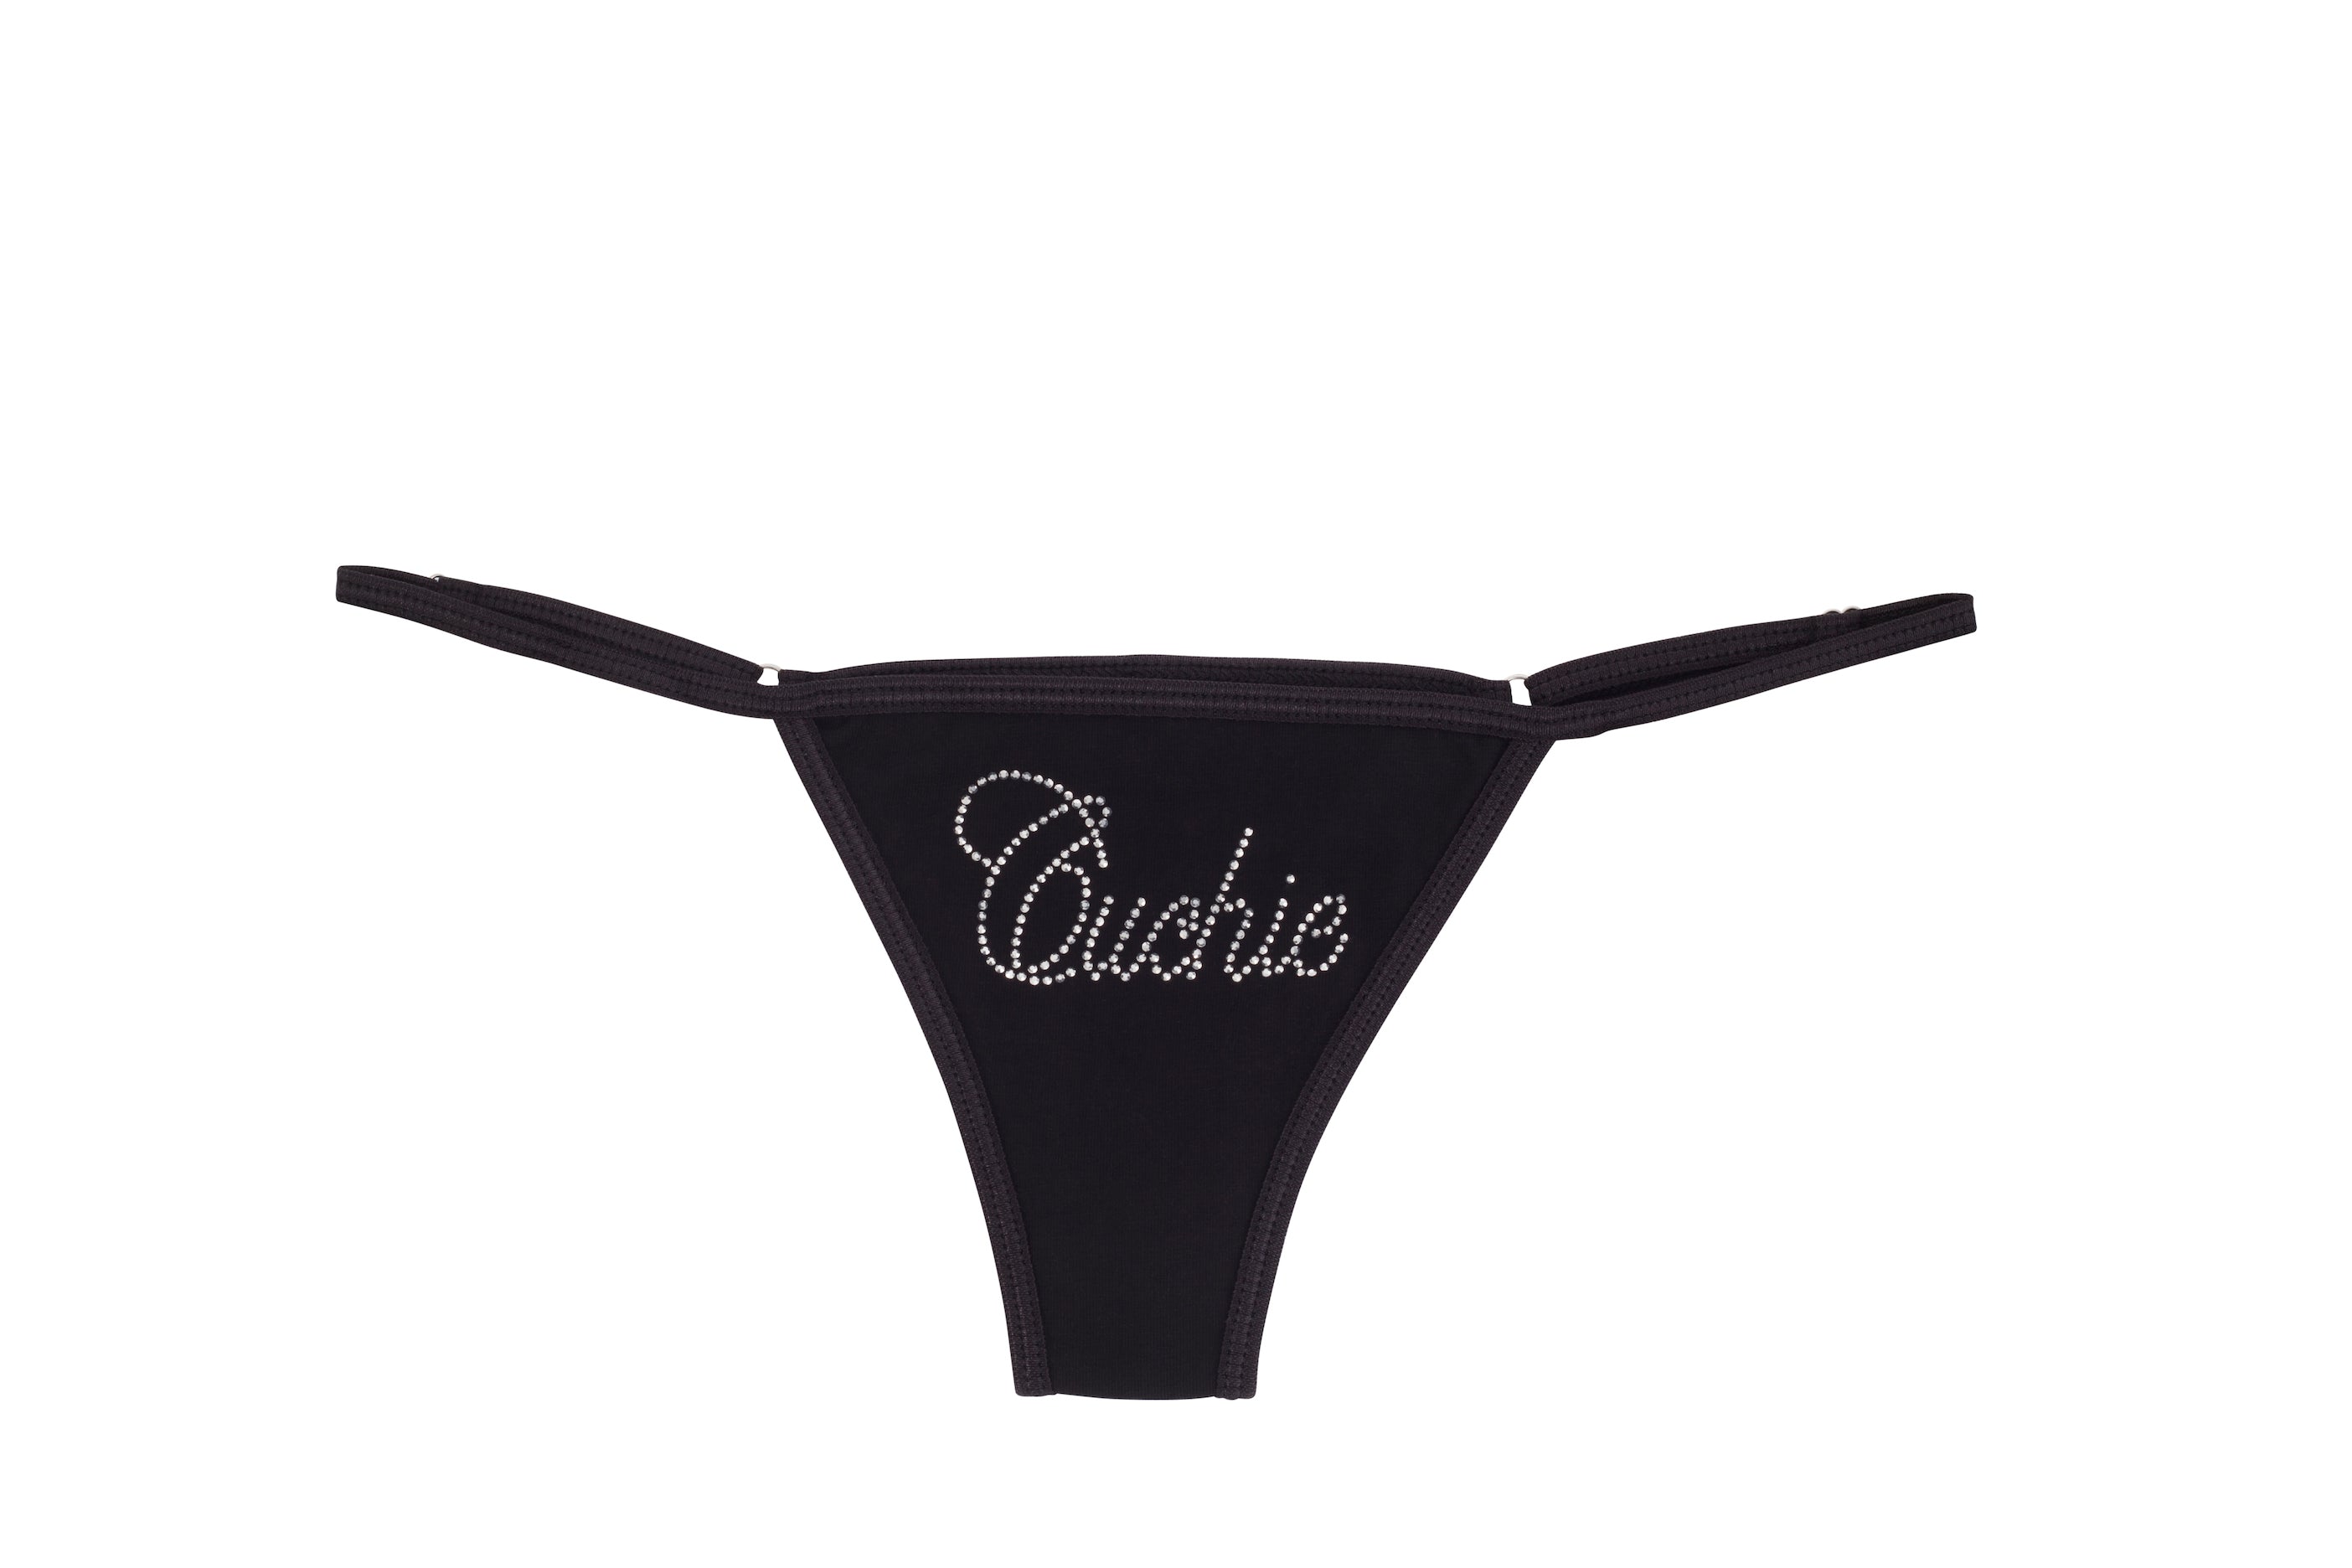 Black thong with "Cuchie" text in rhinestones